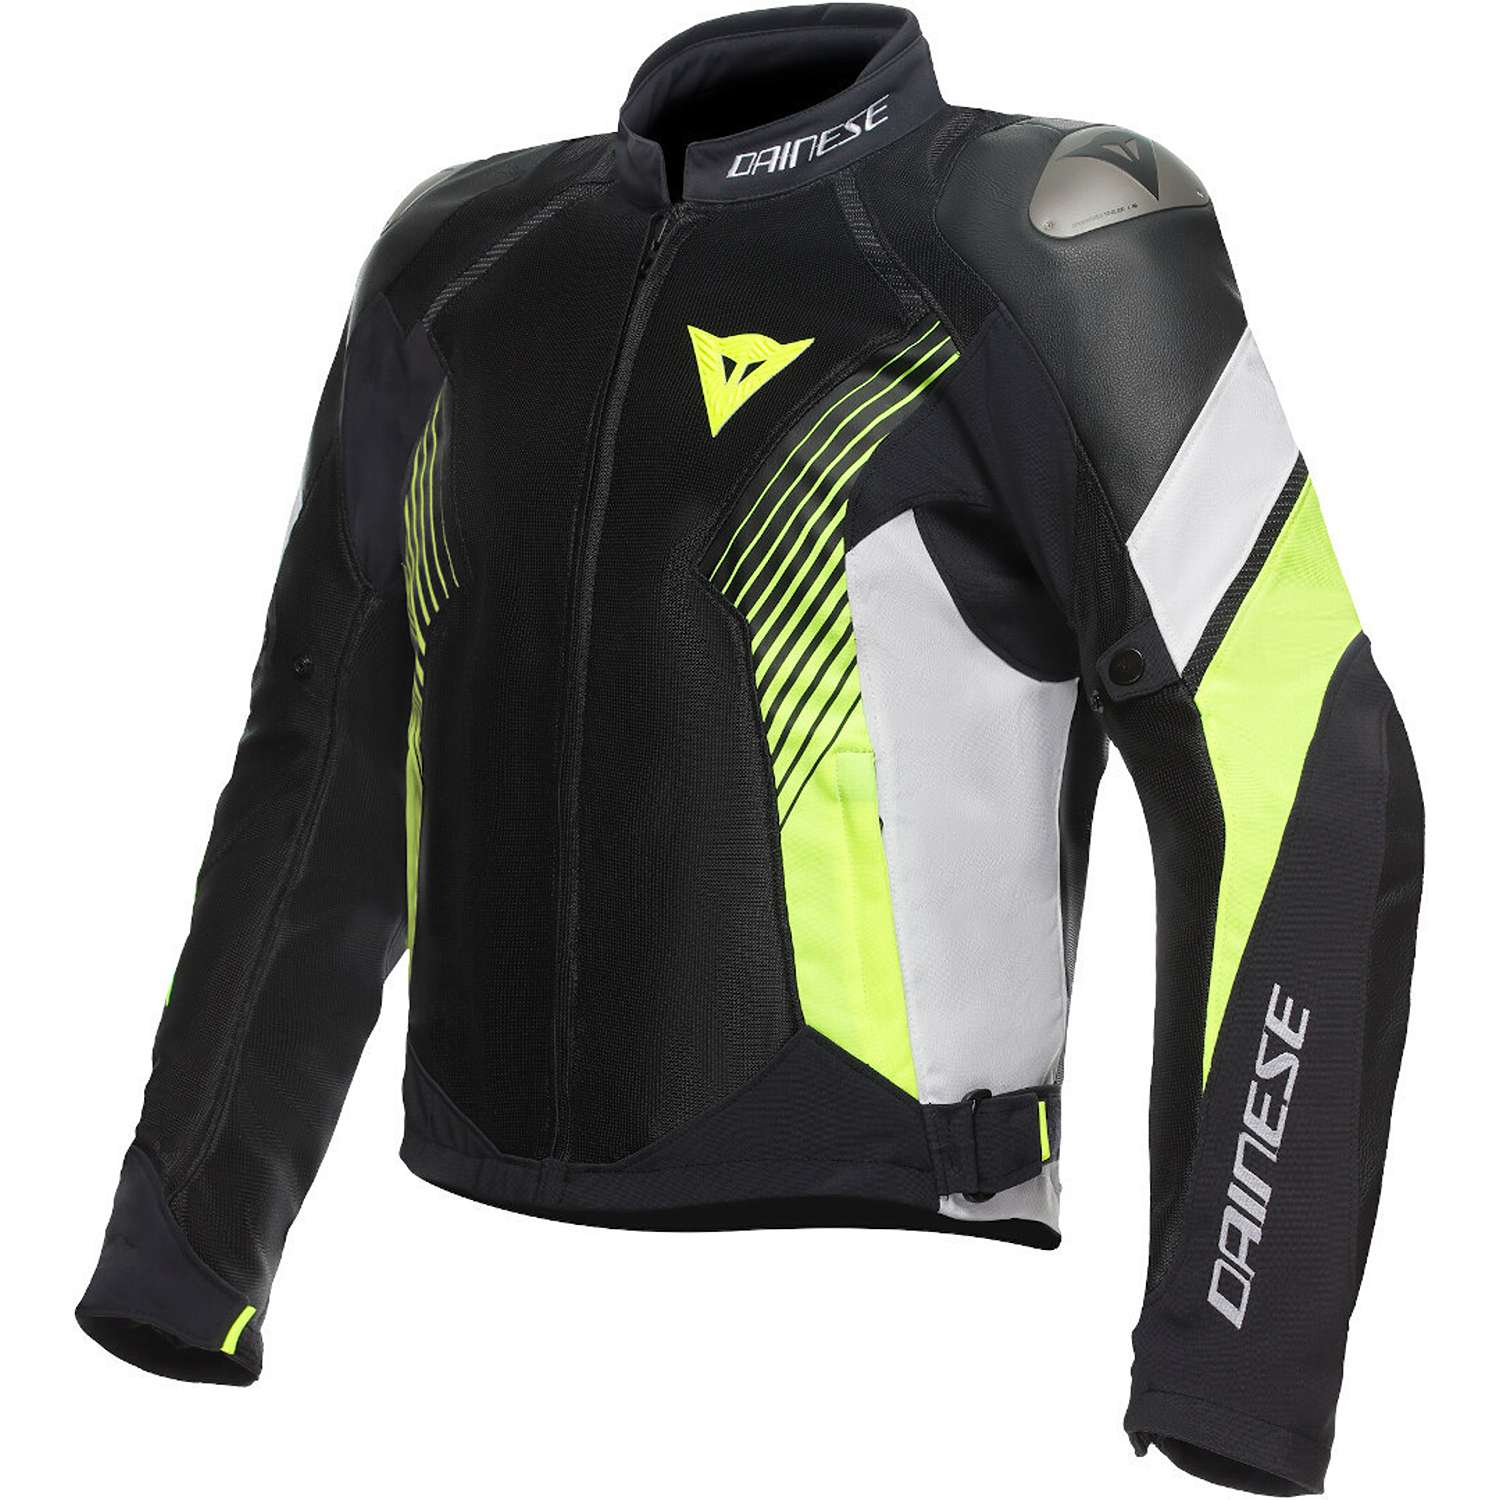 Image of EU Dainese Super Rider 2 Absoluteshell Jacket Black White Fluo Yellow Taille 50